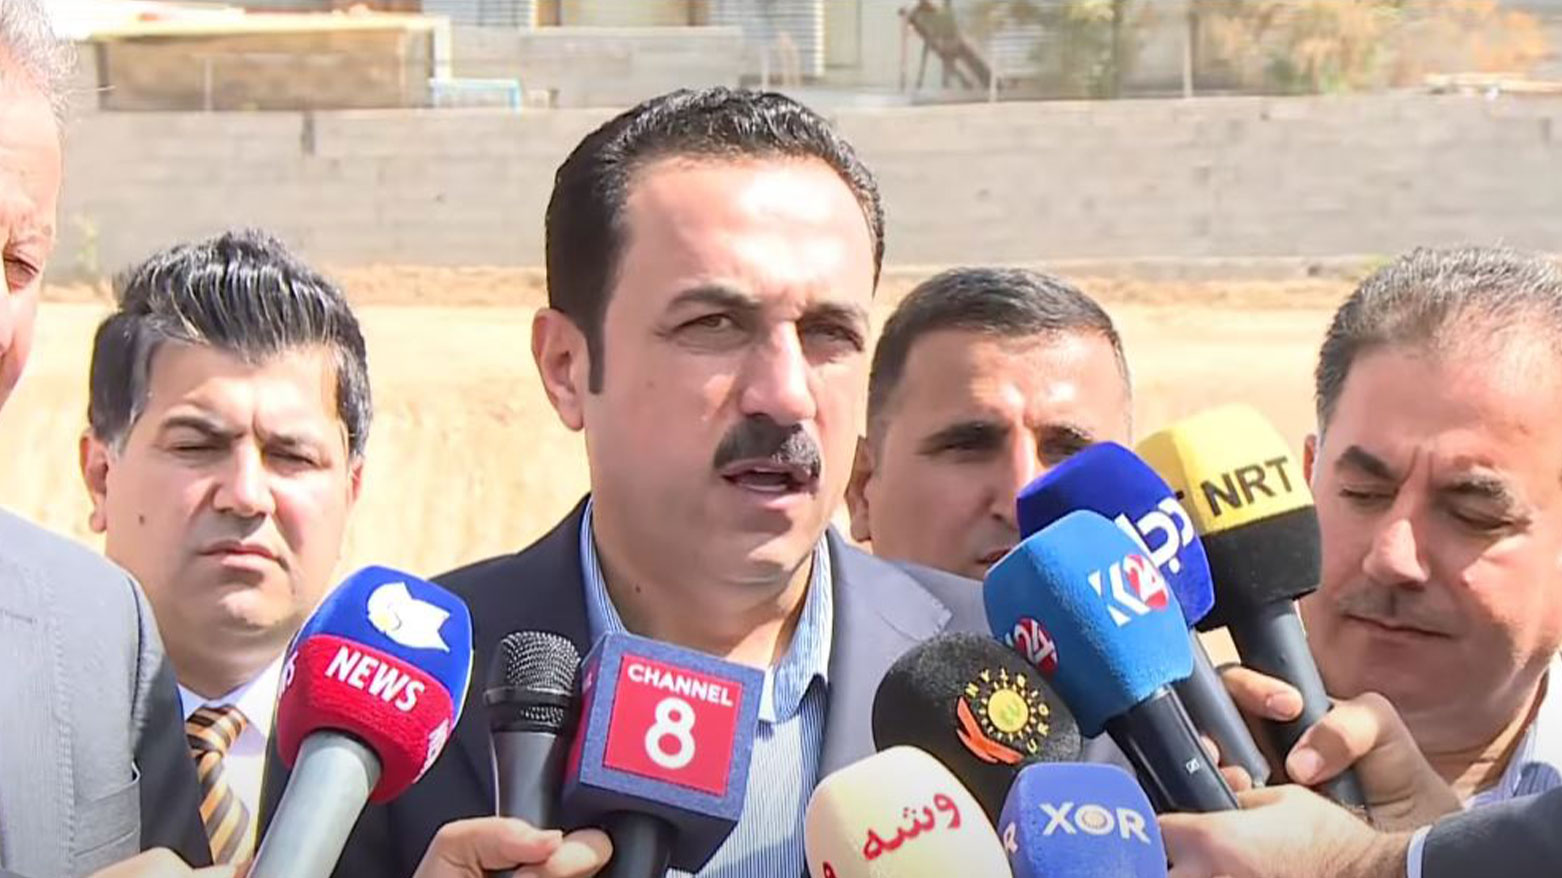 Measures will be taken to prevent flash floods in Erbil says governor